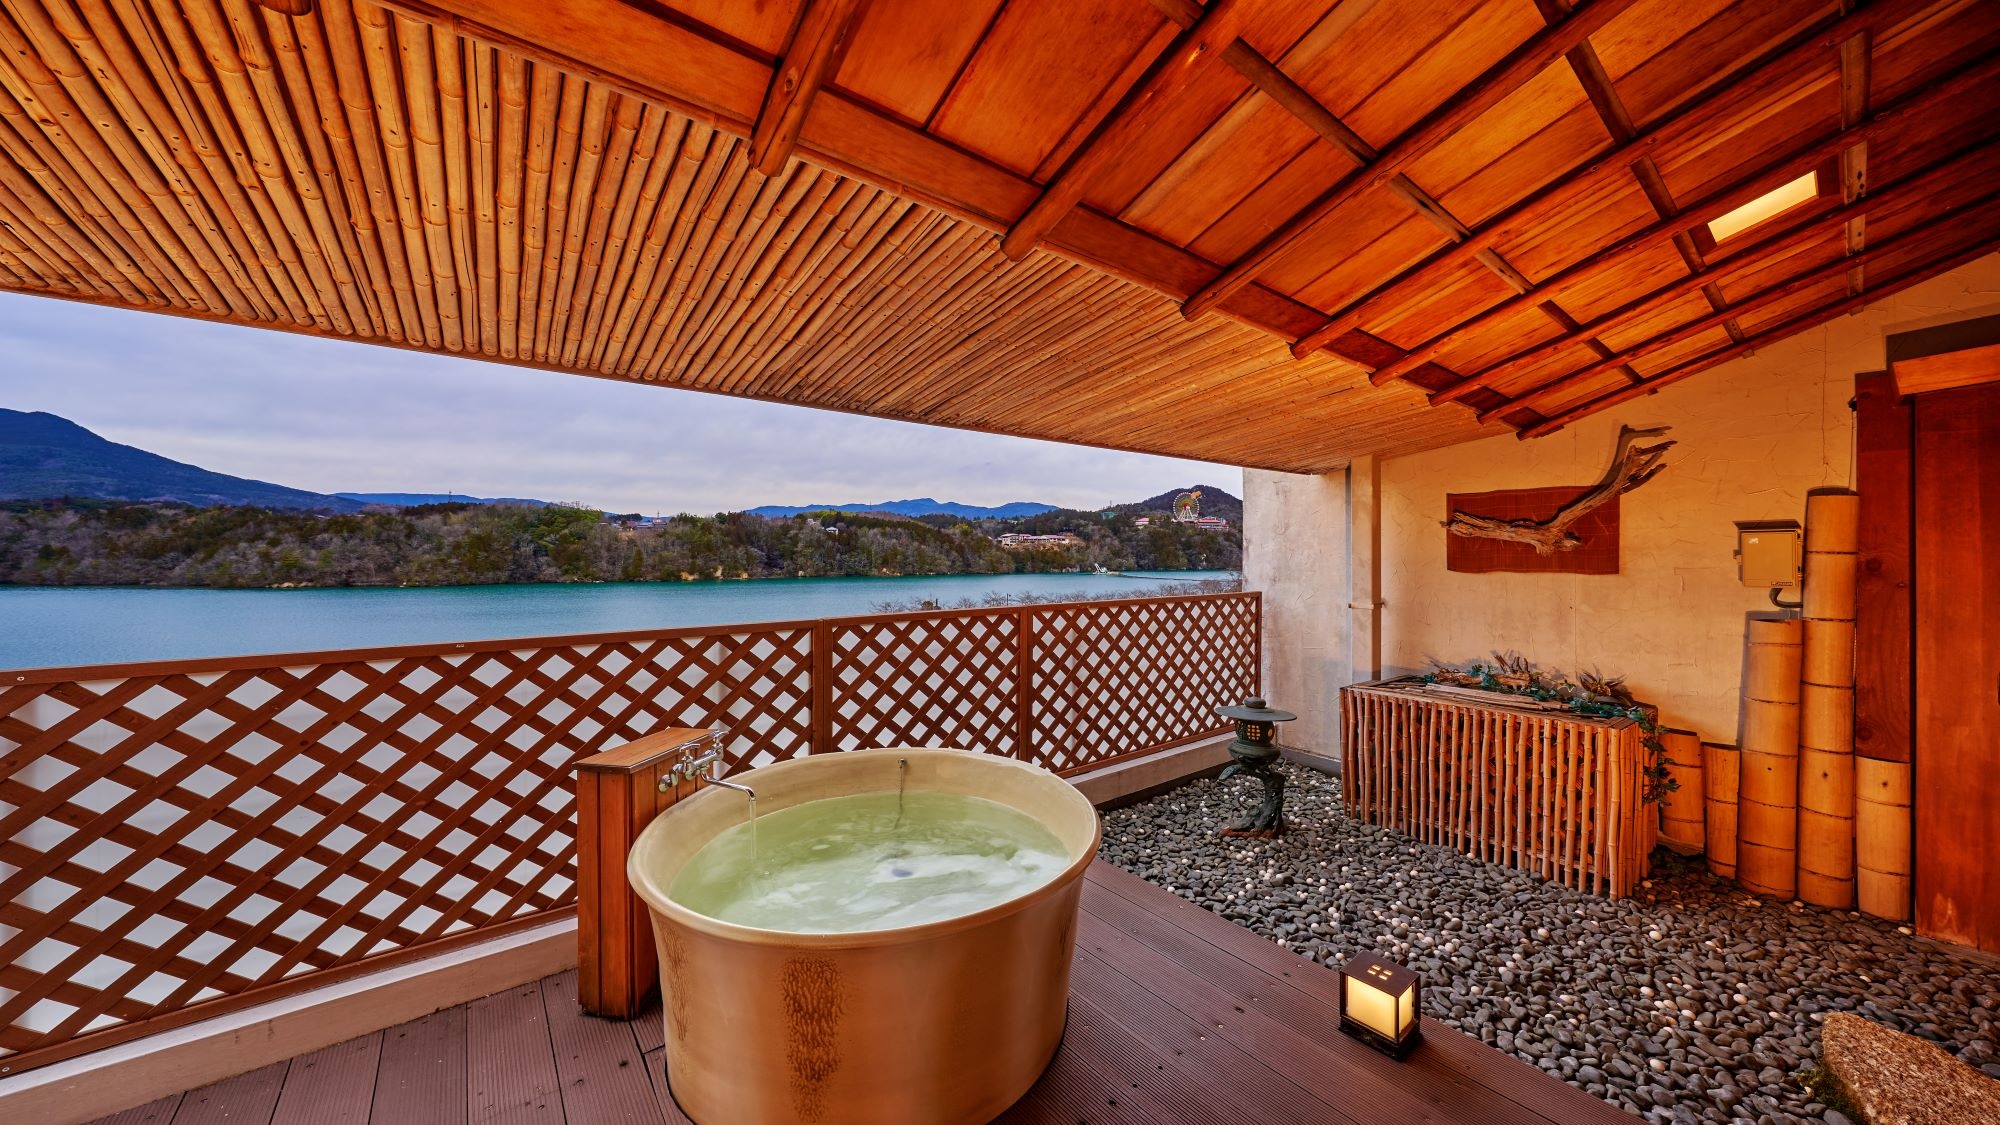 2 Japanese-style rooms with a superior open-air bath * An example of a guest room open-air bath